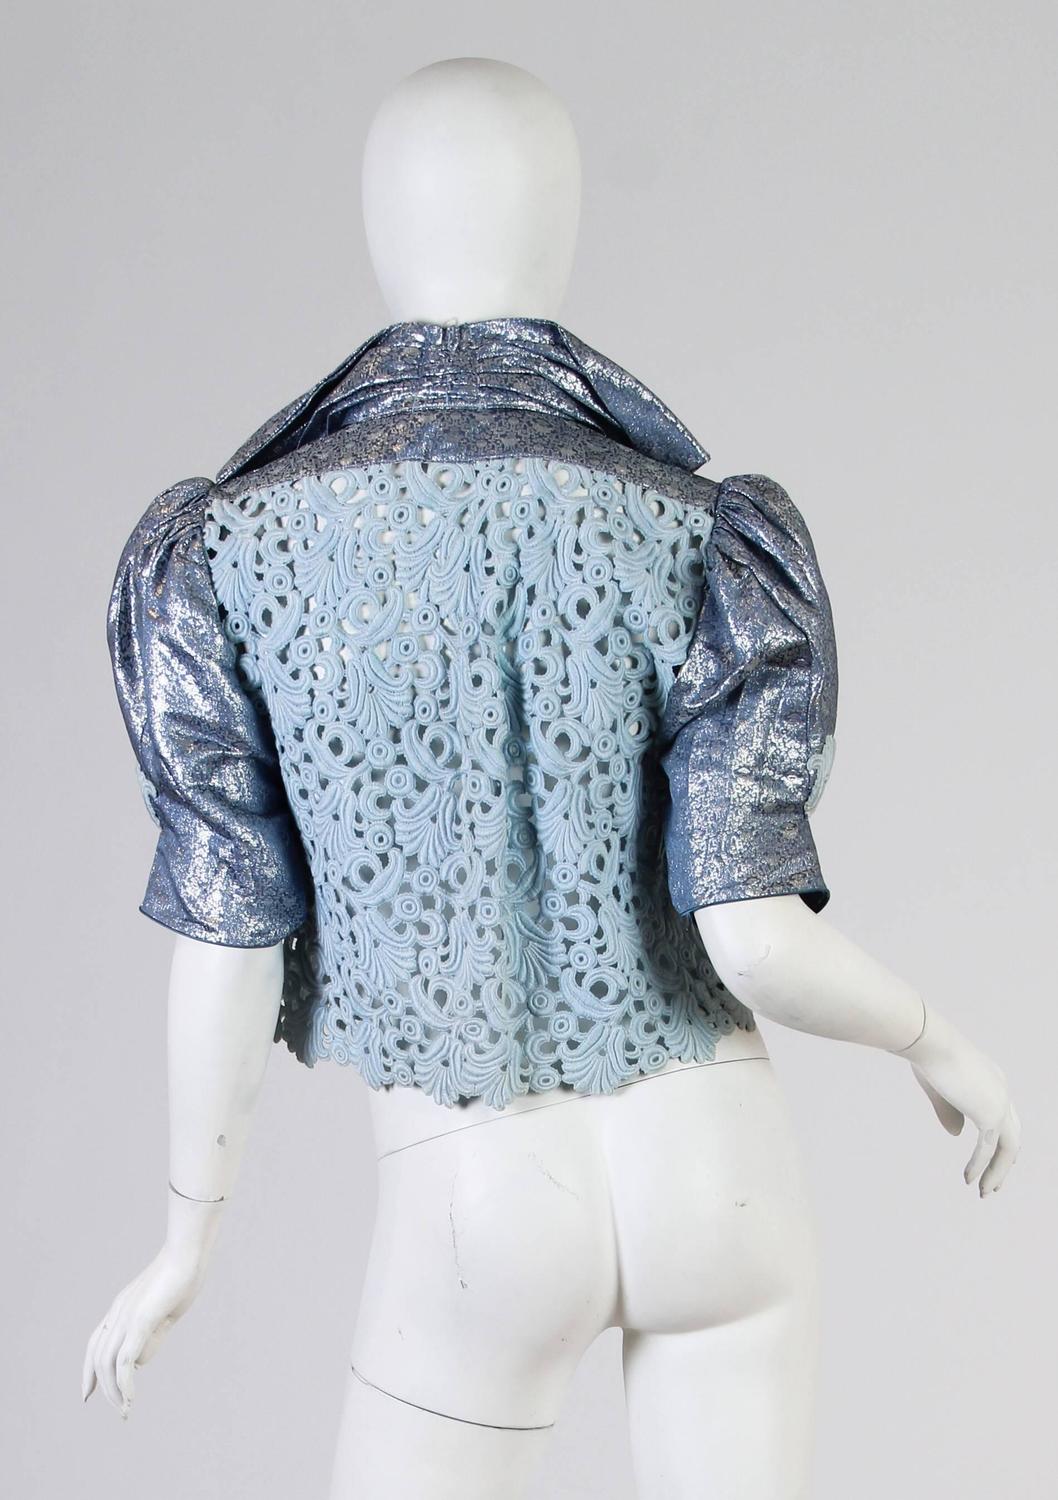 Thierry Mugler Lace and Metallic Top For Sale at 1stdibs